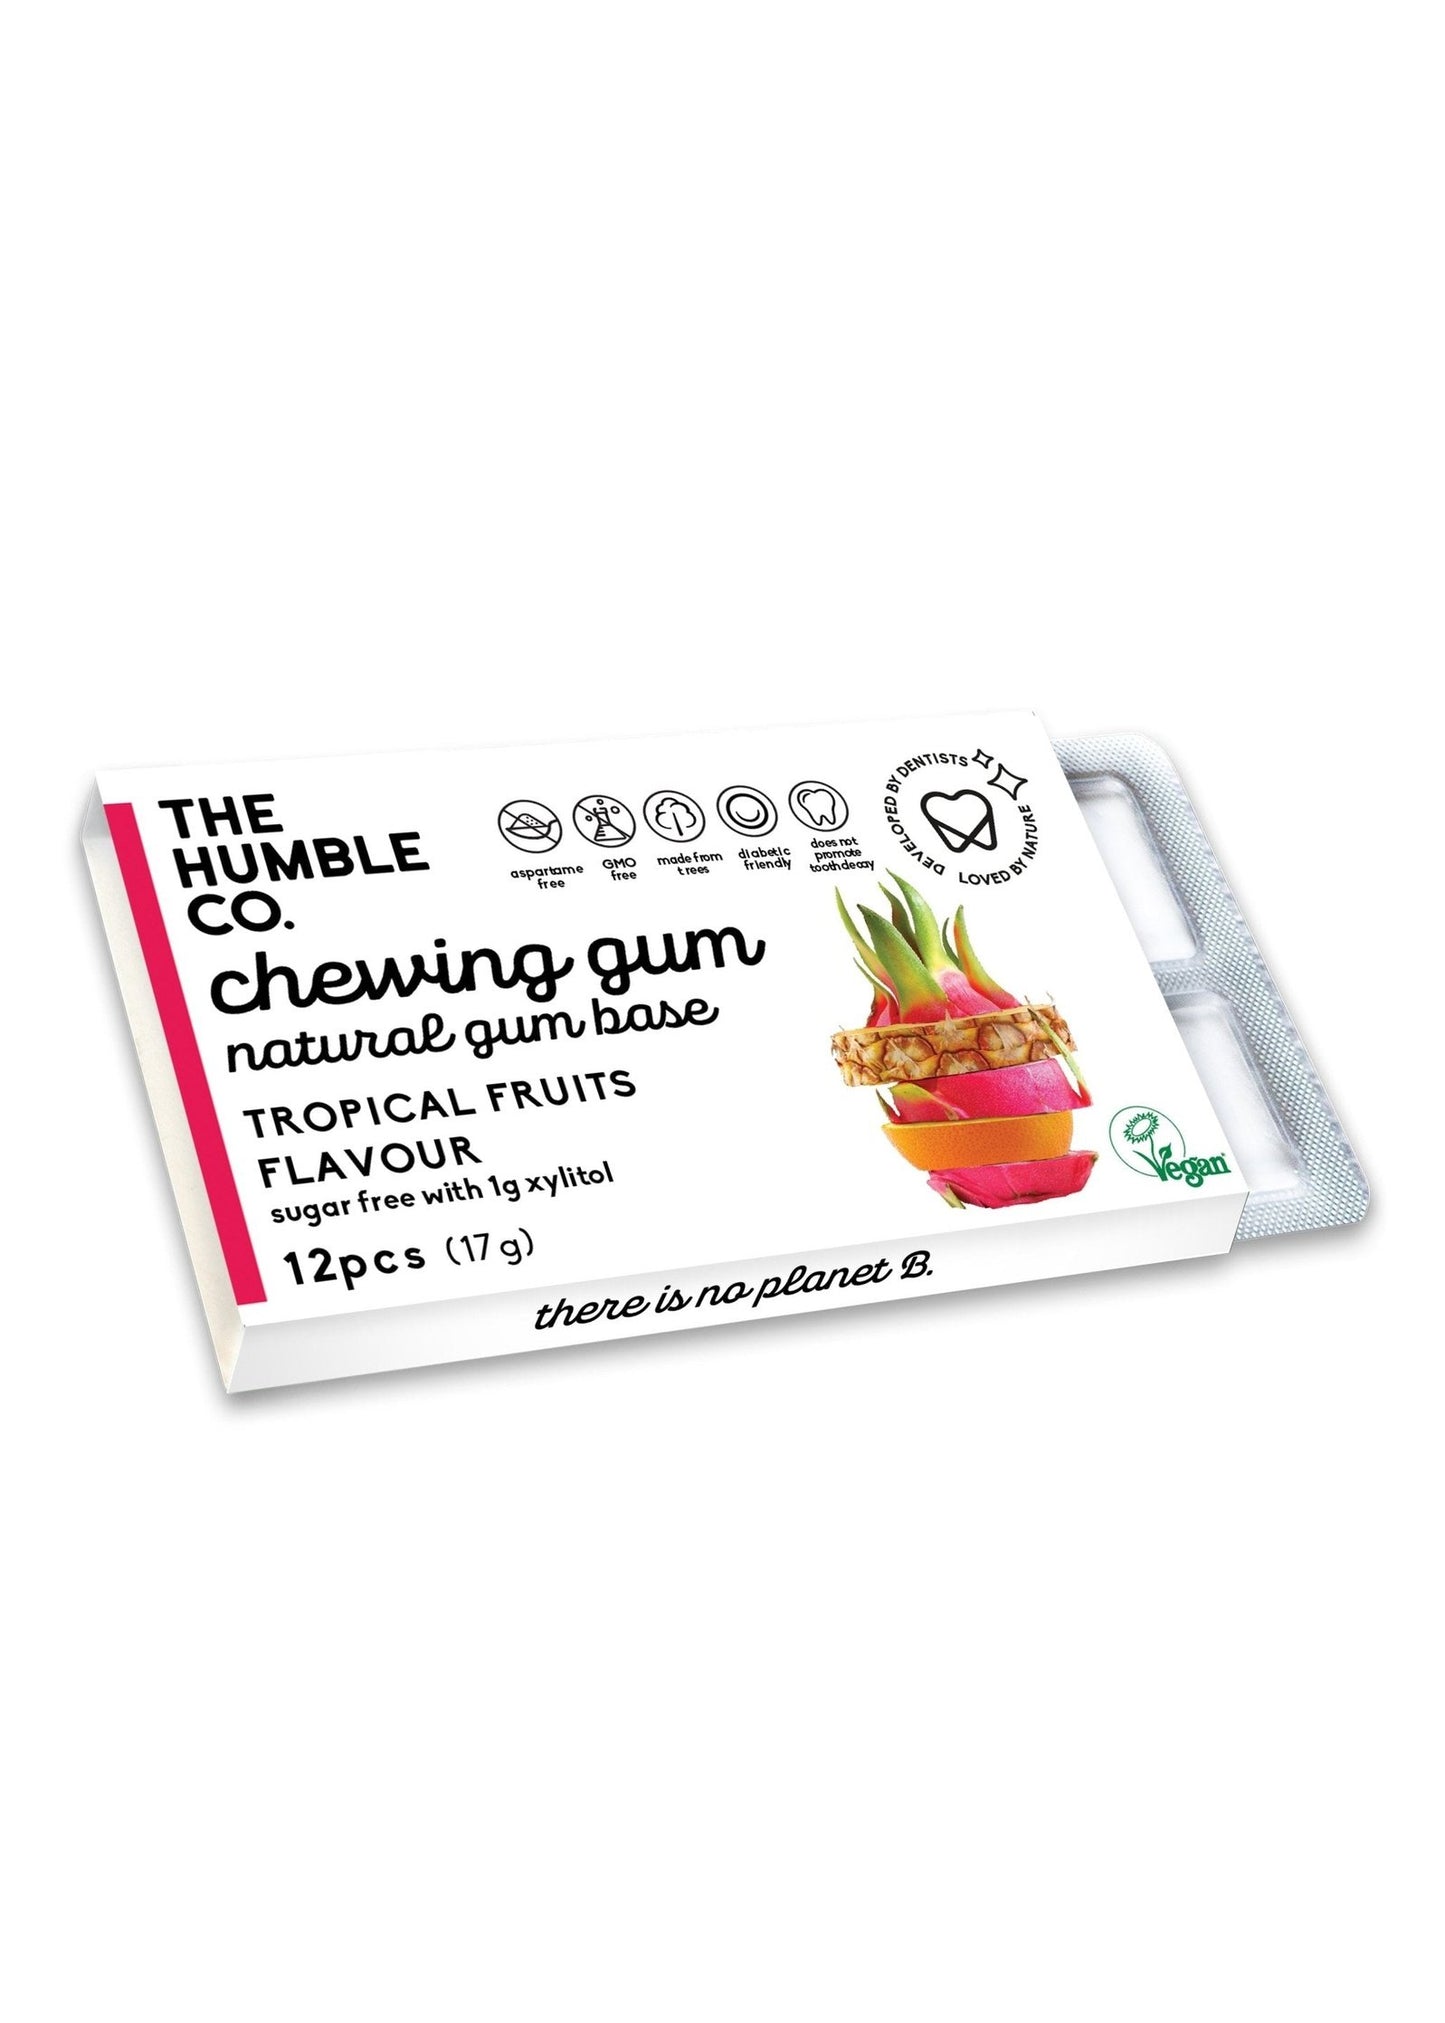 THE HUMBLE CO. Tropical Chewing Gum